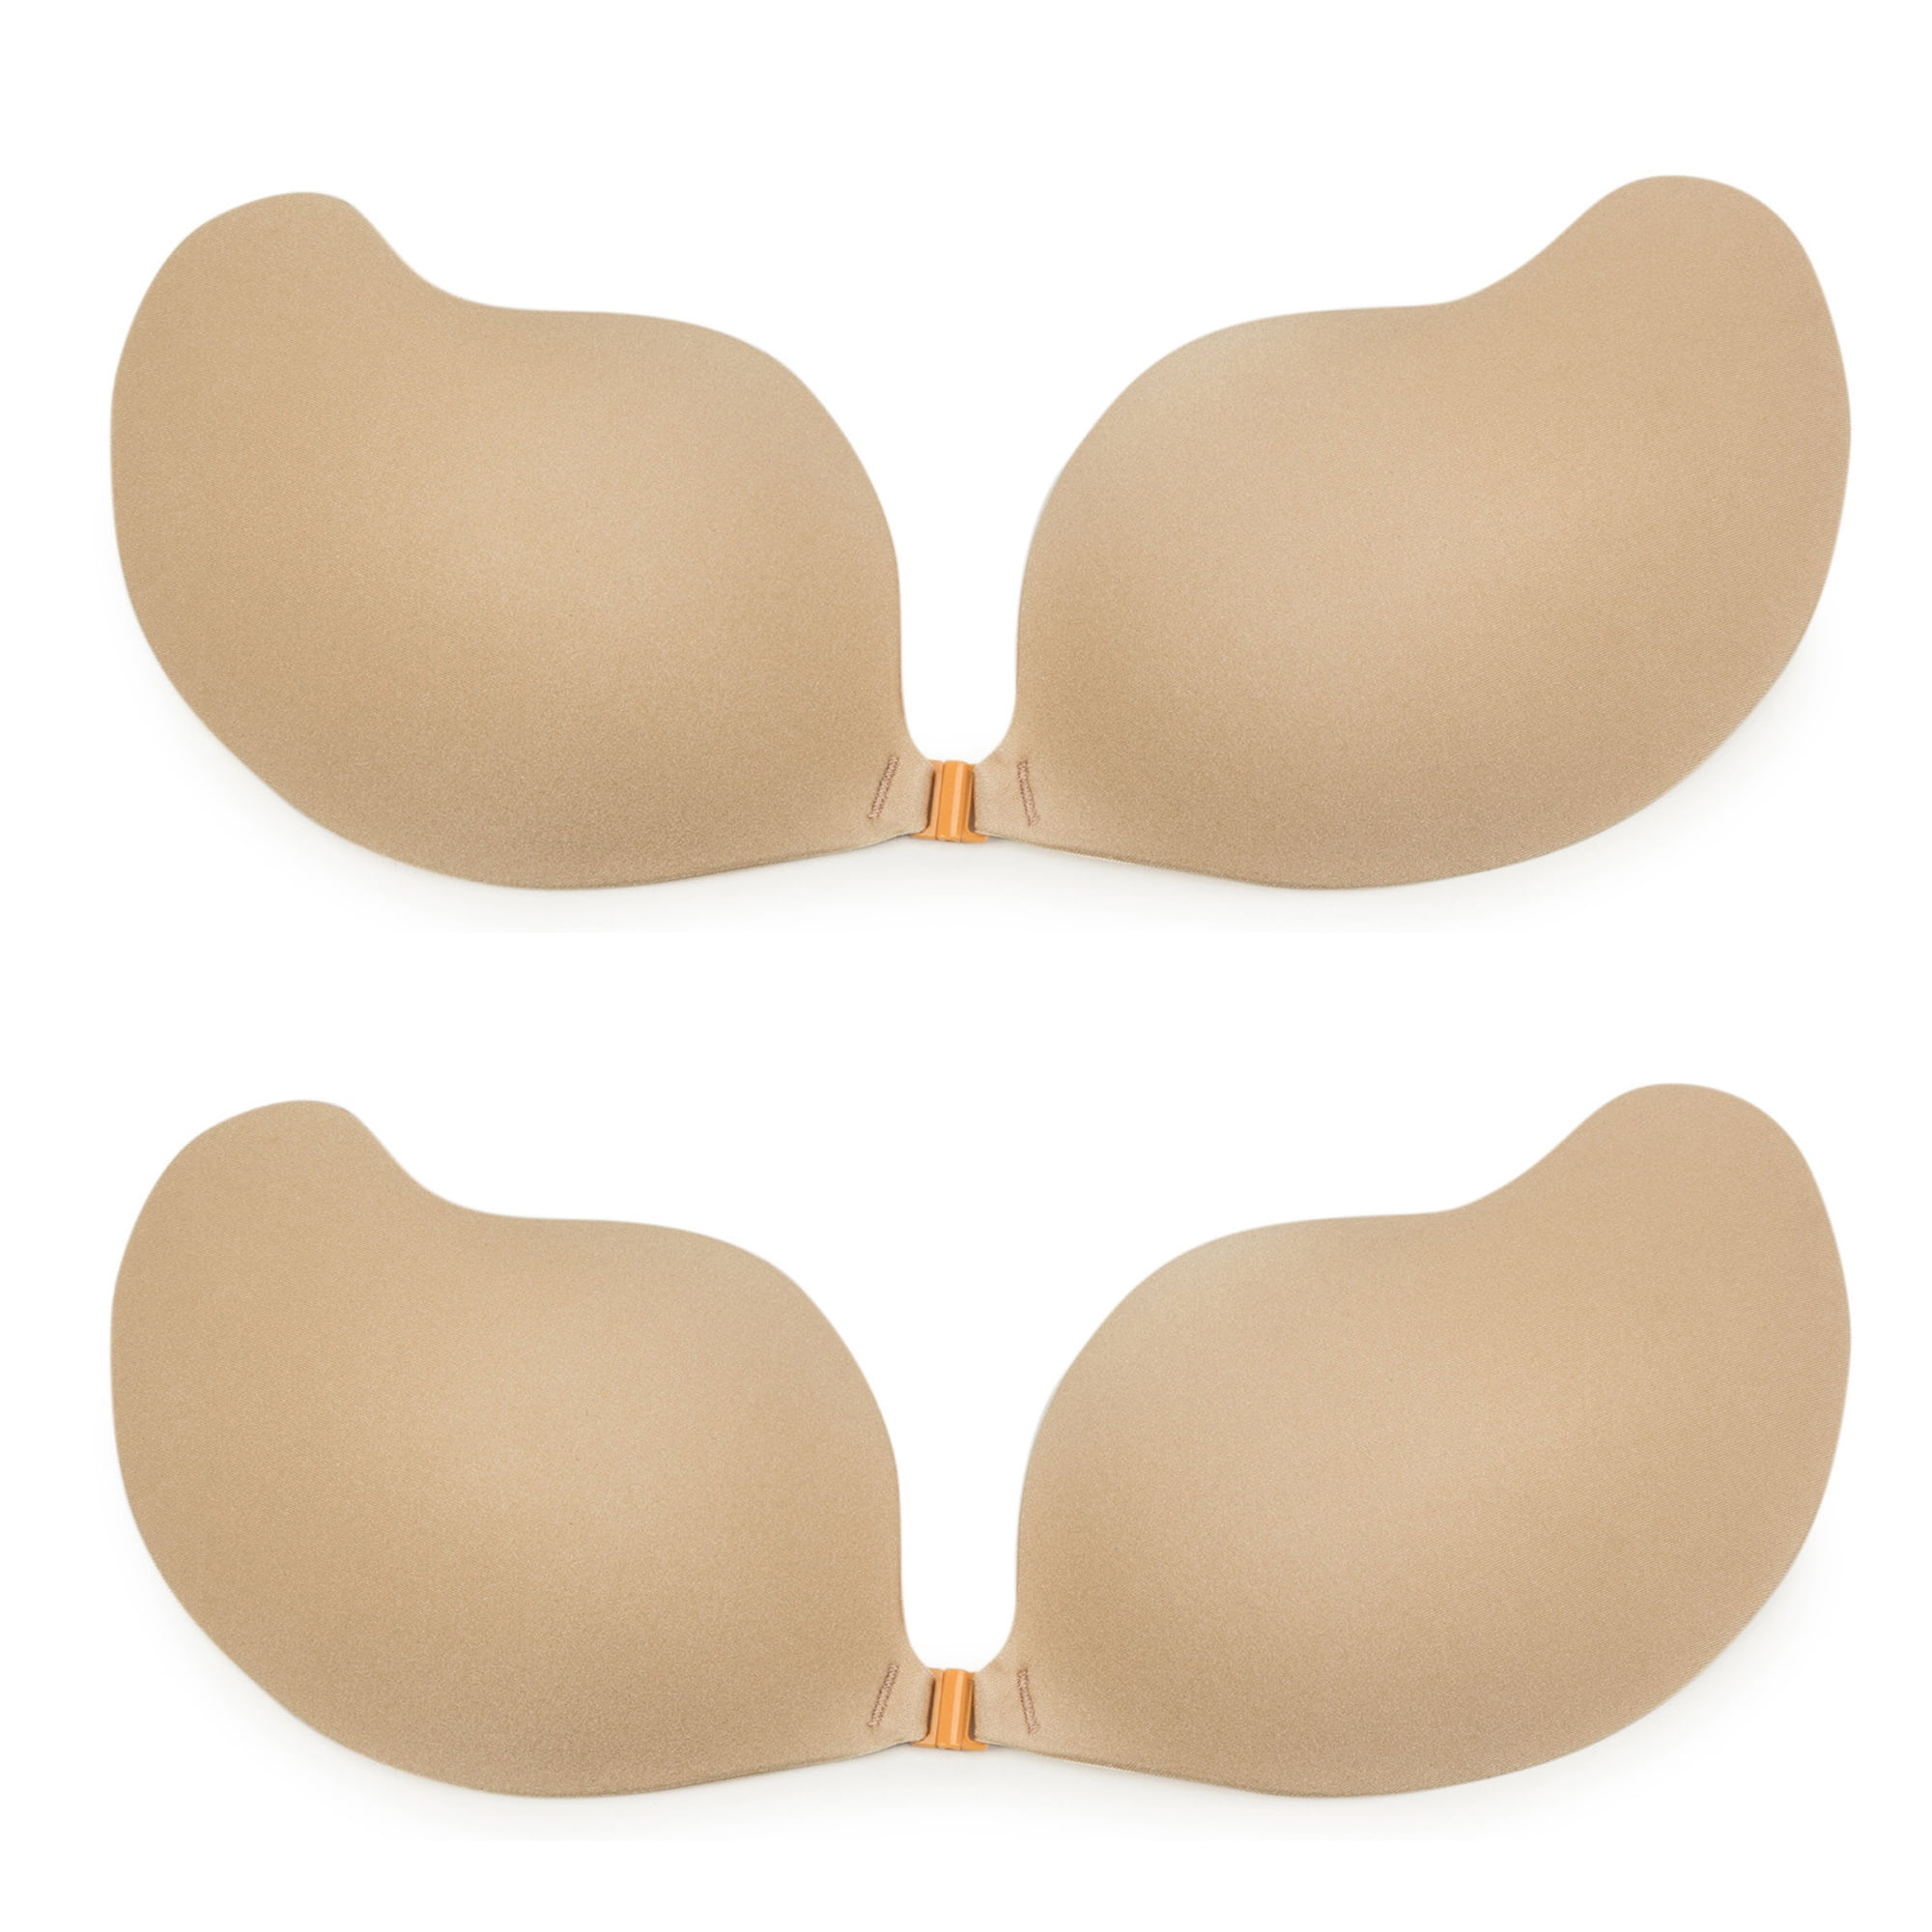 LELINTA 2 Piece Pack Women Self-Adhesive Push Up Bra Silicone Chest Stickers  Nipple Cover Pasties Bra Lady Seamless Gather Invisible Bra 